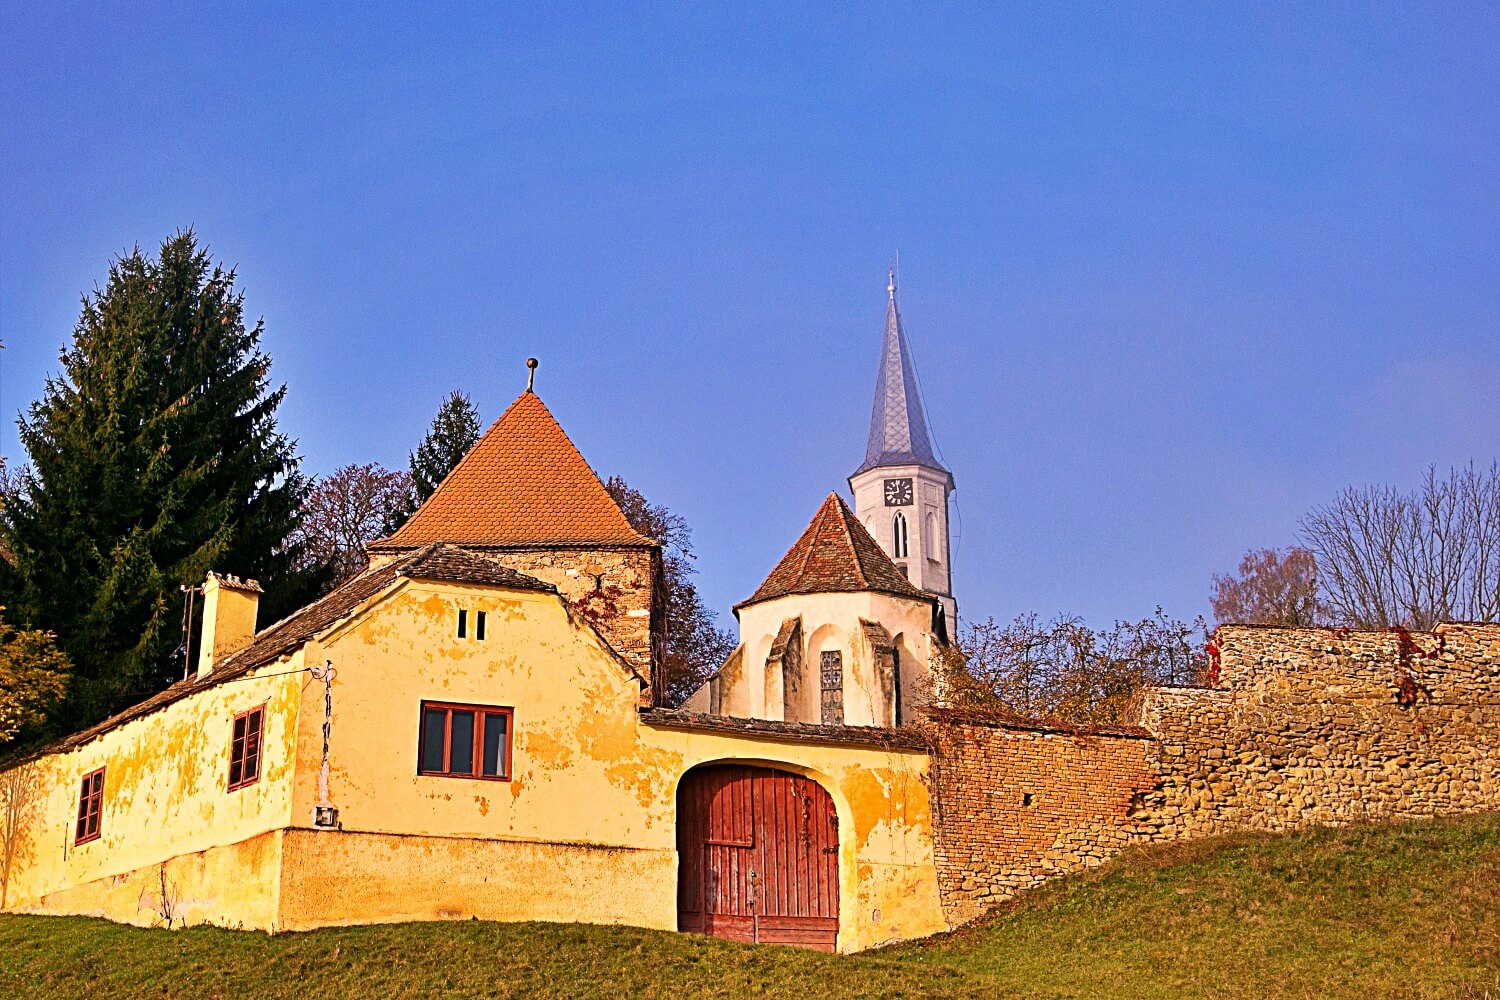 The fortified church from Alţâna